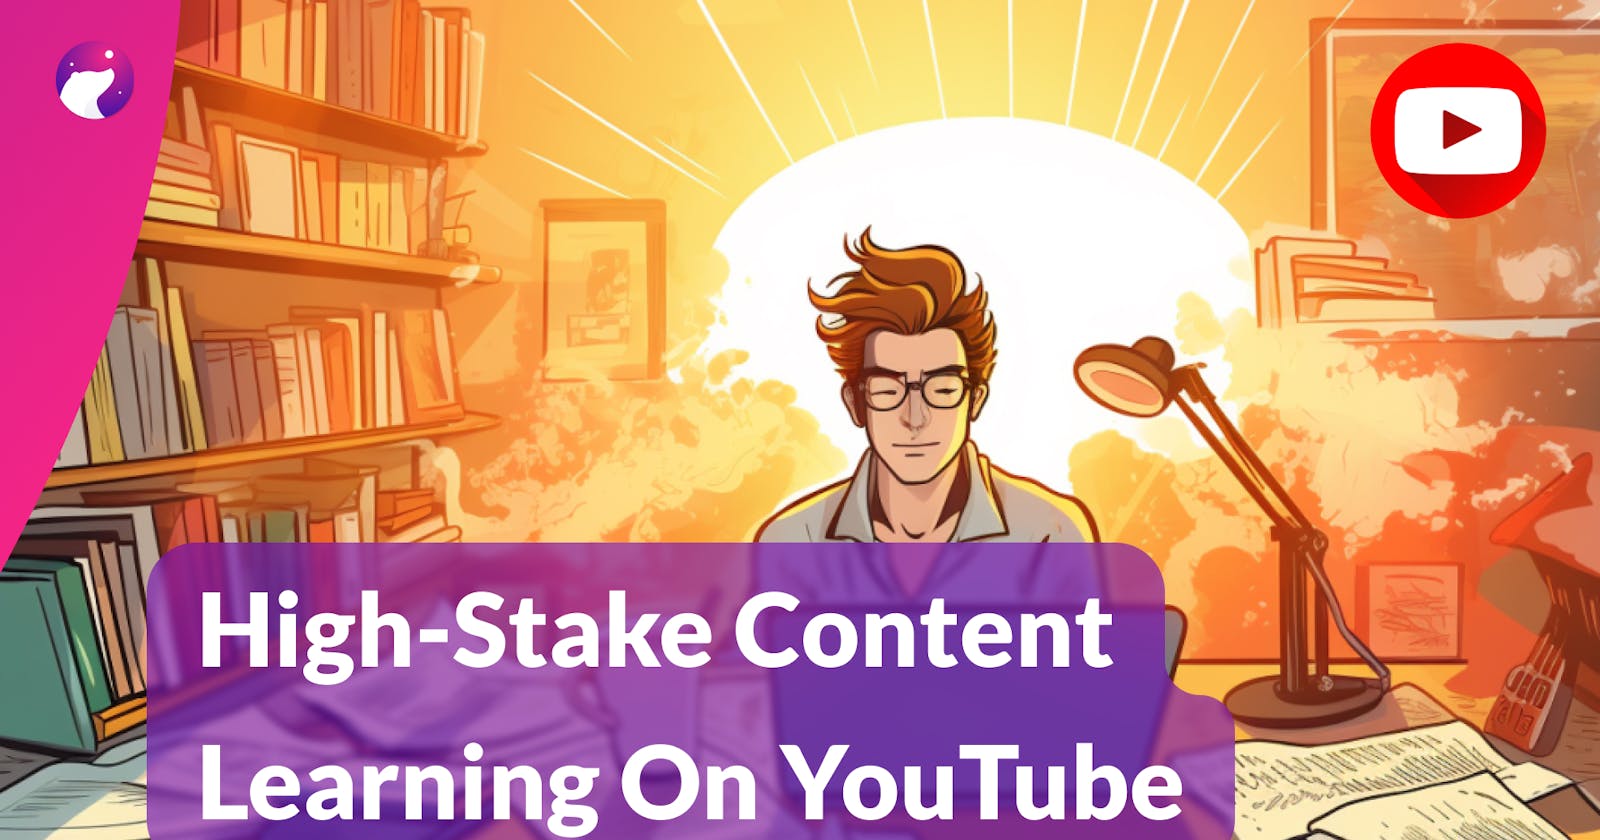 Learning High-Stake Content Effectively on YouTube